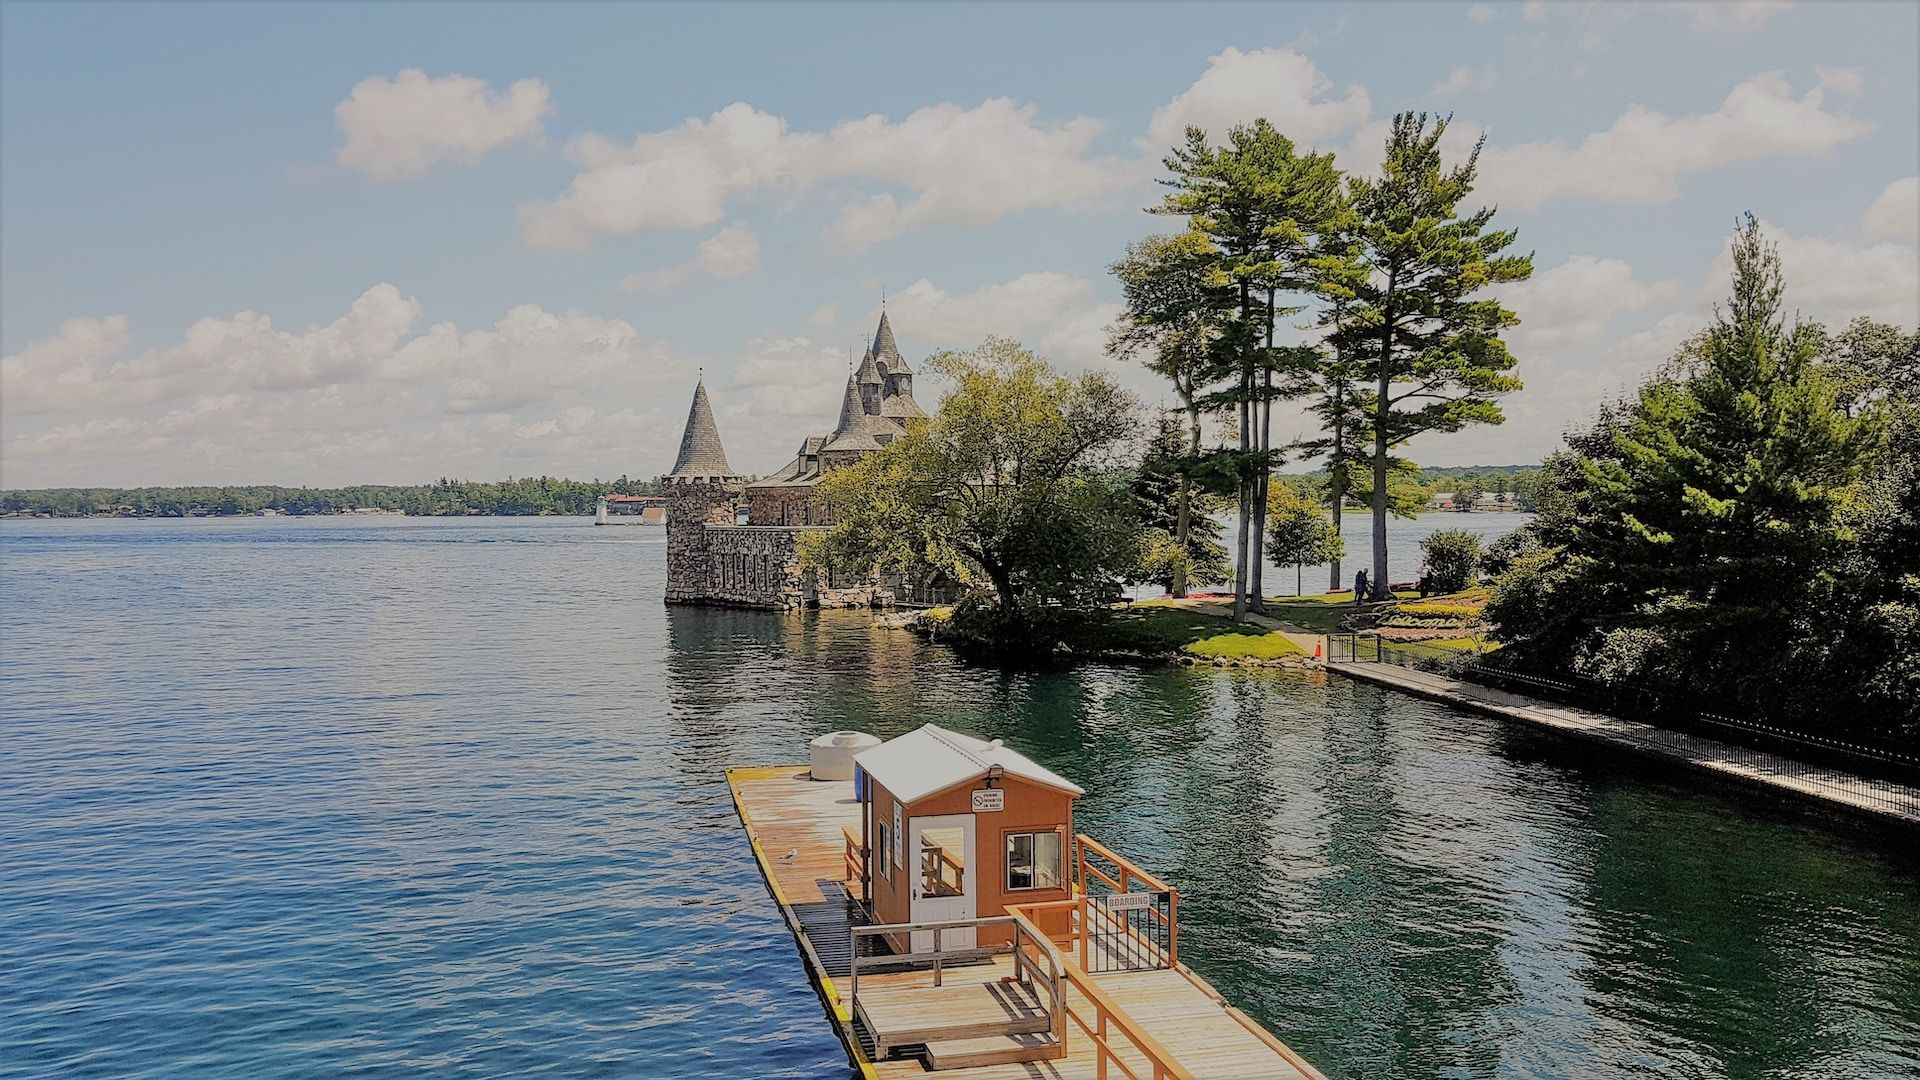 View of Boldt Castle in the Thousands Islands region of New York State